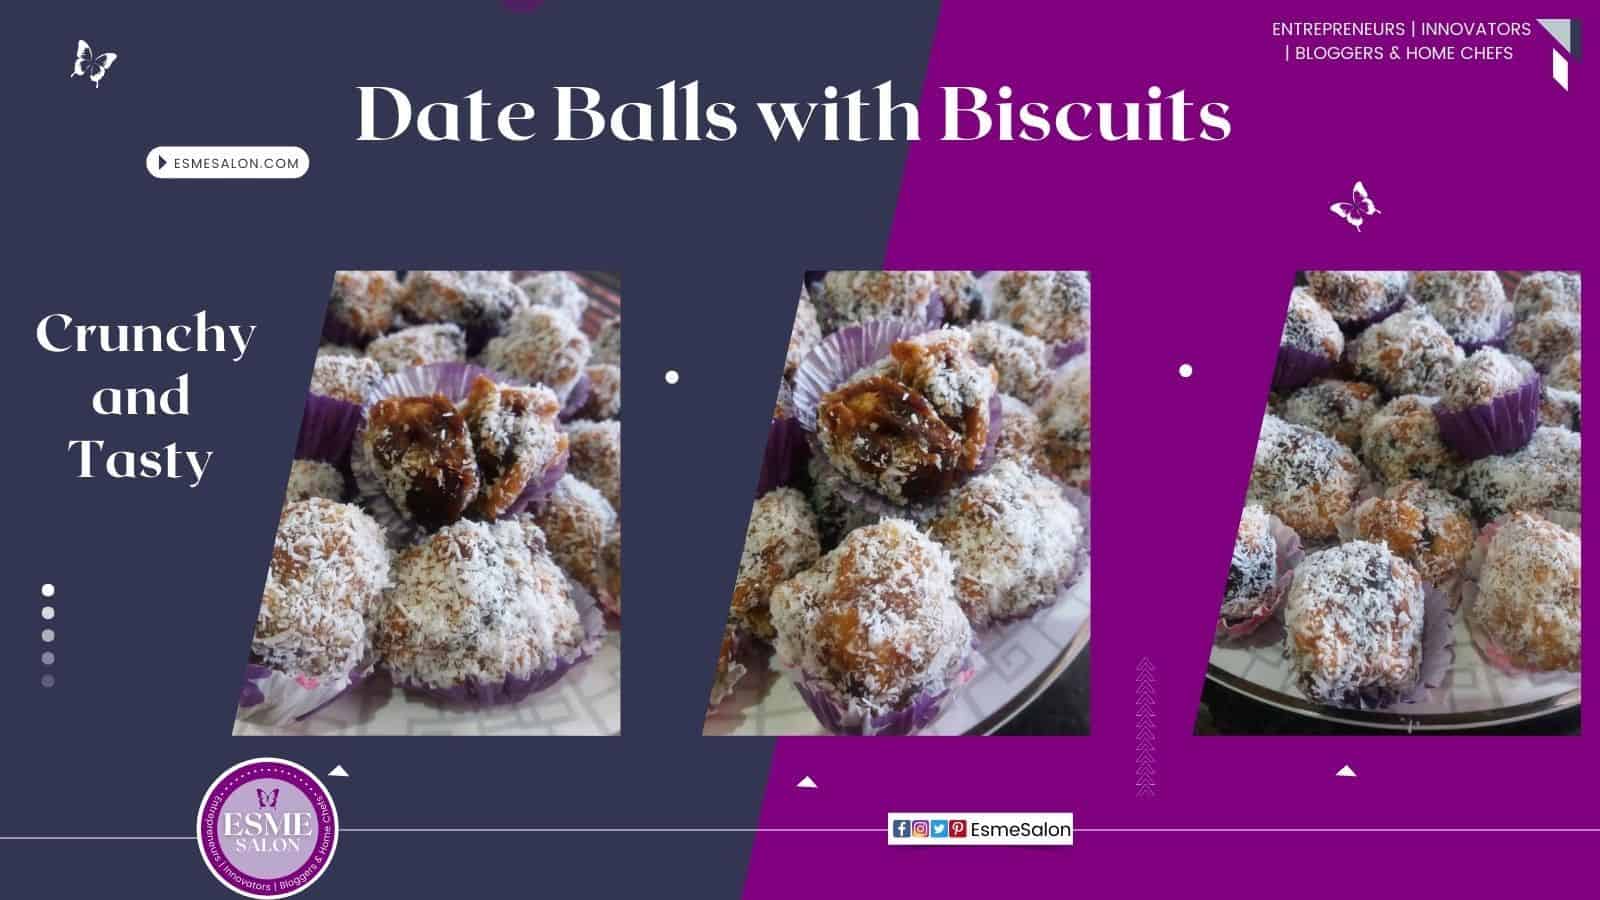 An image of Date balls rolled in coconut